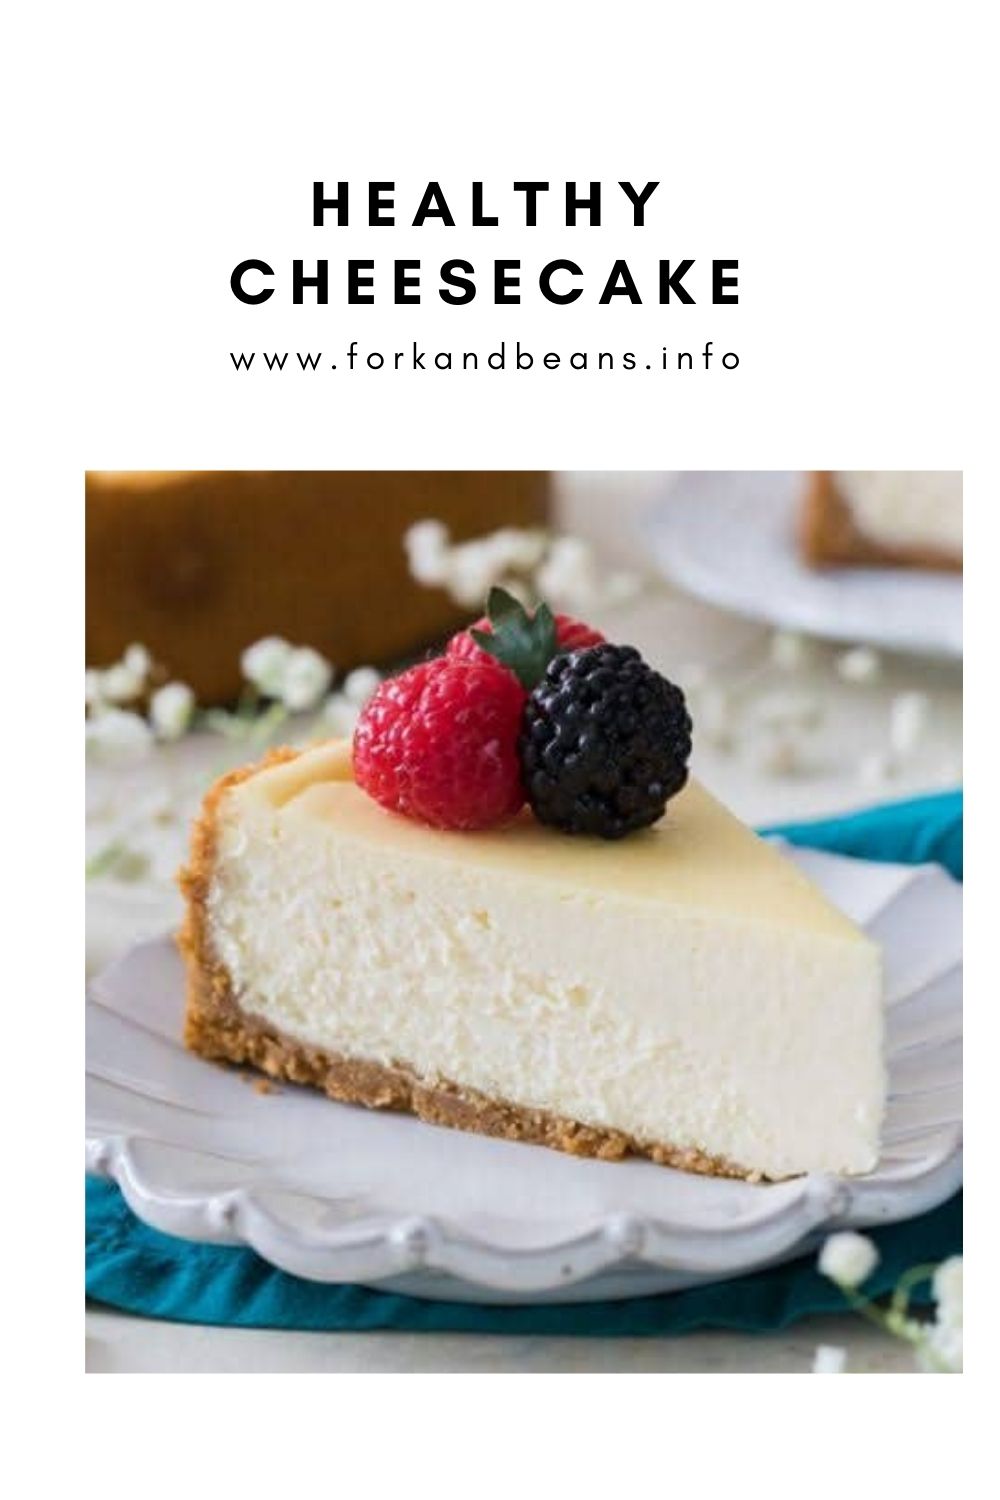 Quality and Healthy Cheesecake With Less Spending